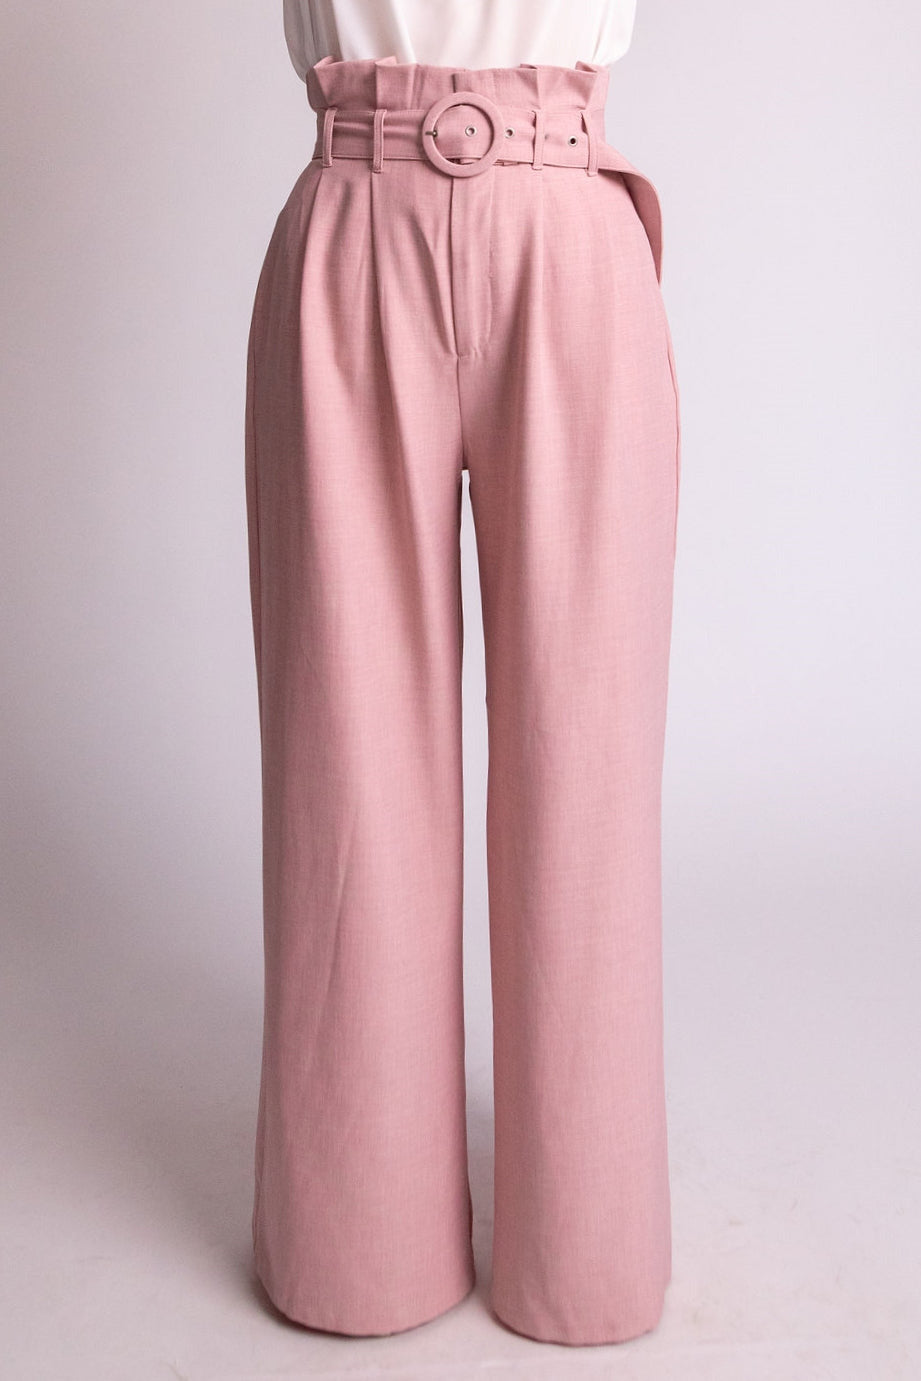 Rosé Paperbag Wide Leg Pleated Trouser - Expressive Collective CO.